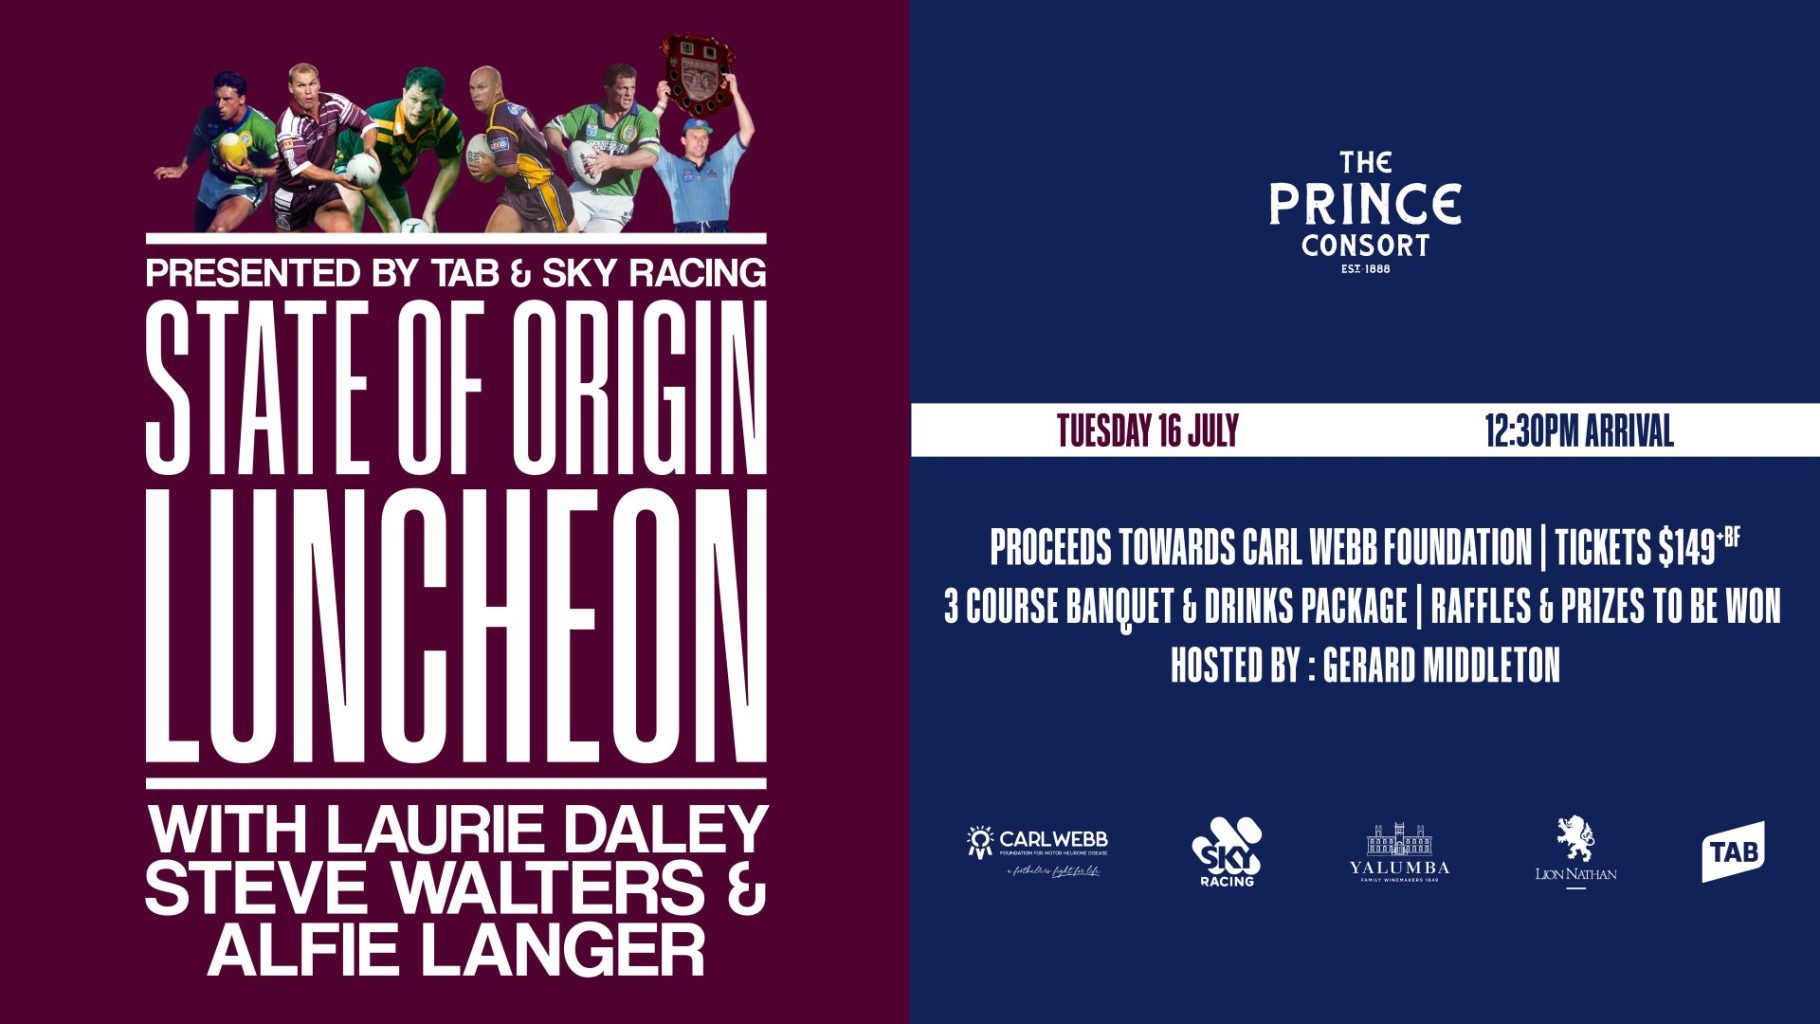 State of Origin Luncheon ft. Laurie Daley, Steve Walters & Alfie Langer | Events at The Prince Consort